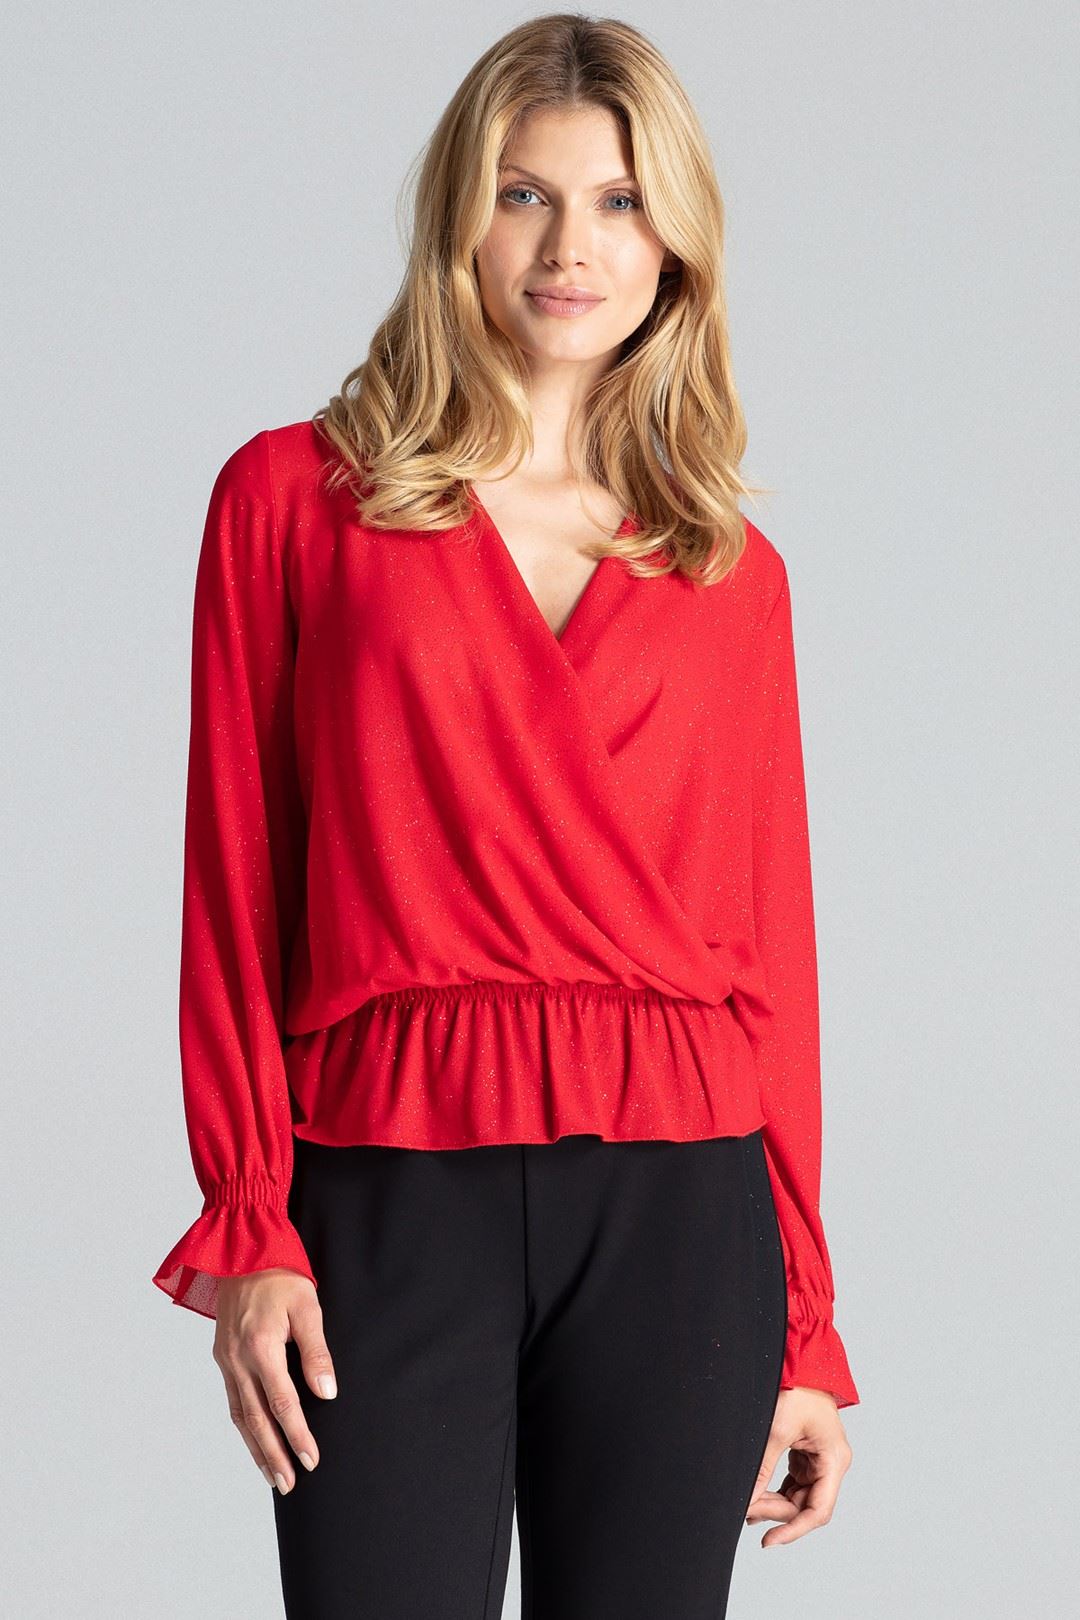 Blouse M690 Red S